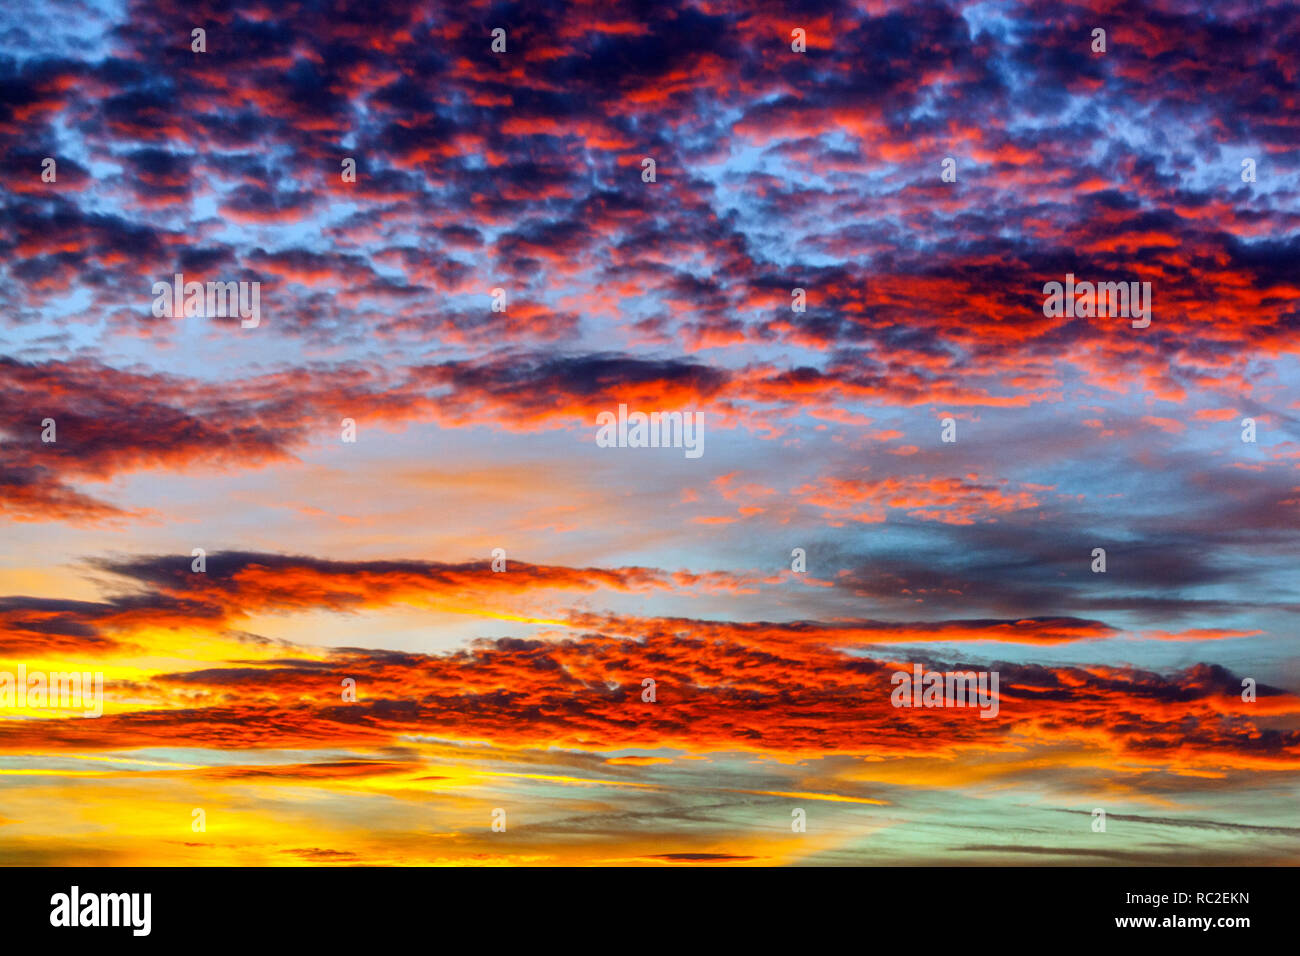 Bloody clouds on sky dramatic sunset red sky Stock Photo